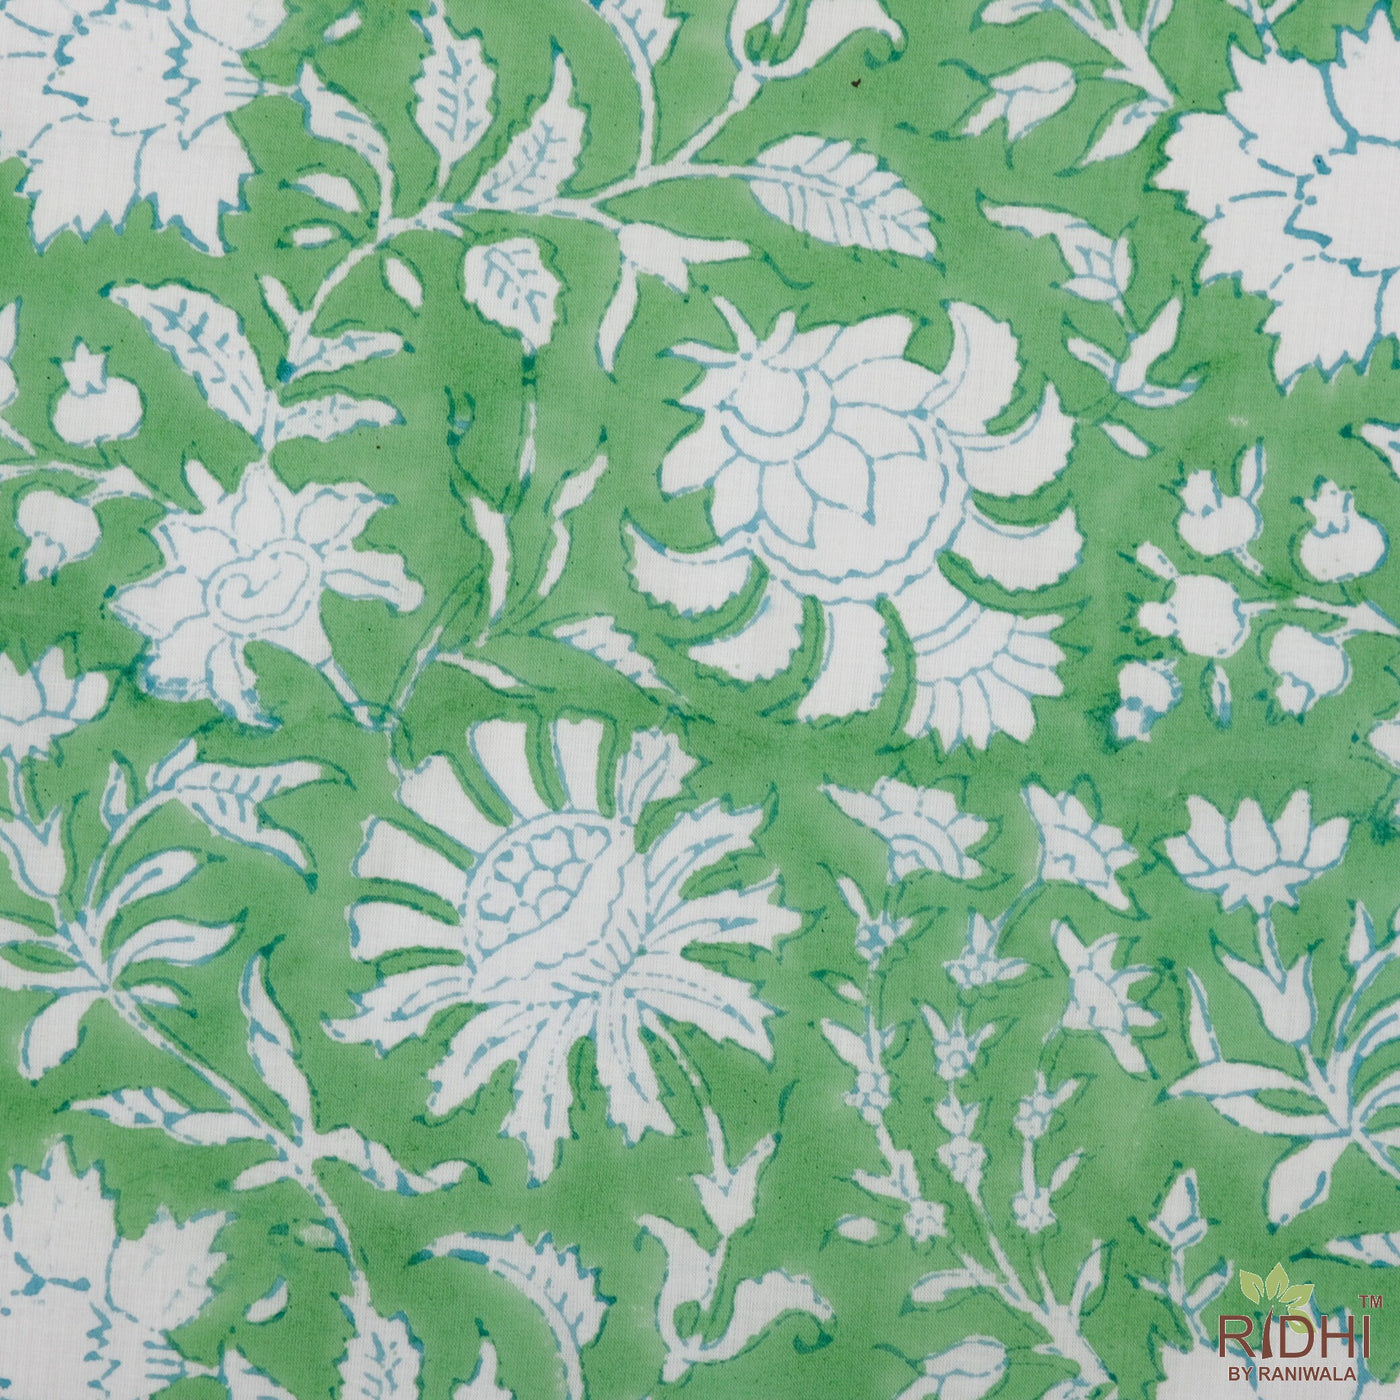 Fabricrush Mint Green and Off White Indian Hand Block Floral Printed Cotton Cloth Napkins Set, Wedding Event Party Home, 18x18"- Cocktail 20x20"- Dinner